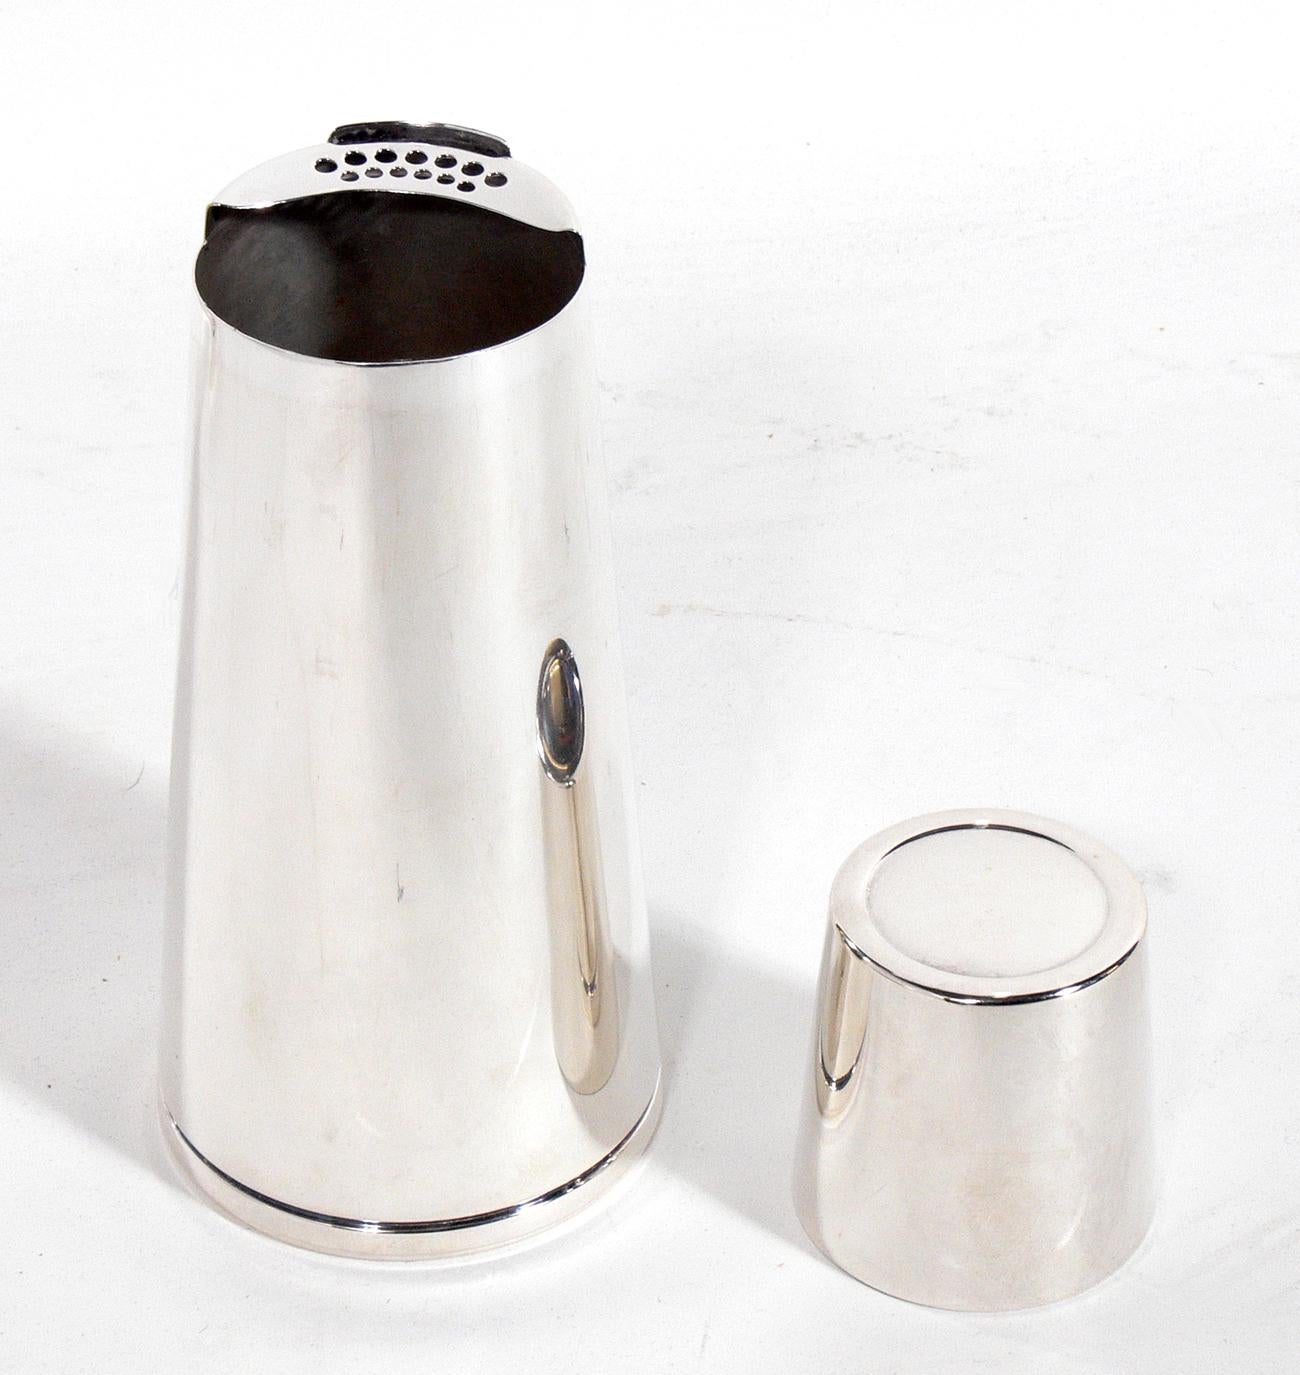 Plated Selection of Art Deco Cocktail Shakers